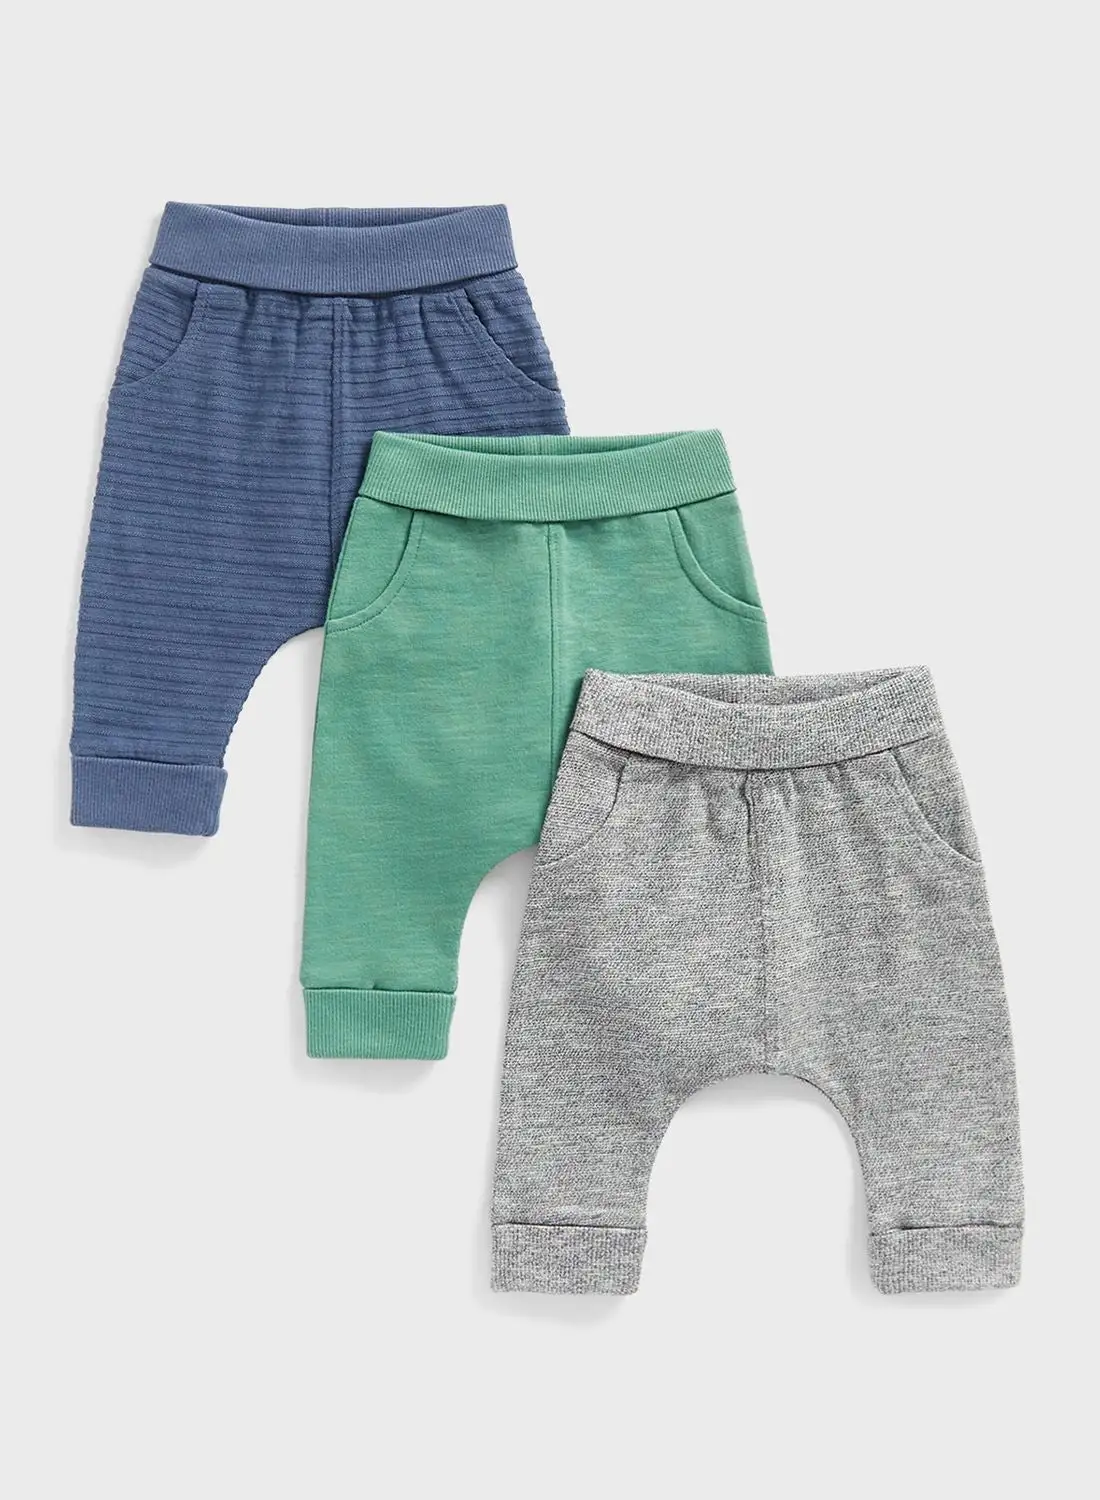 mothercare Infant 3 Pack Assorted Sweatpants